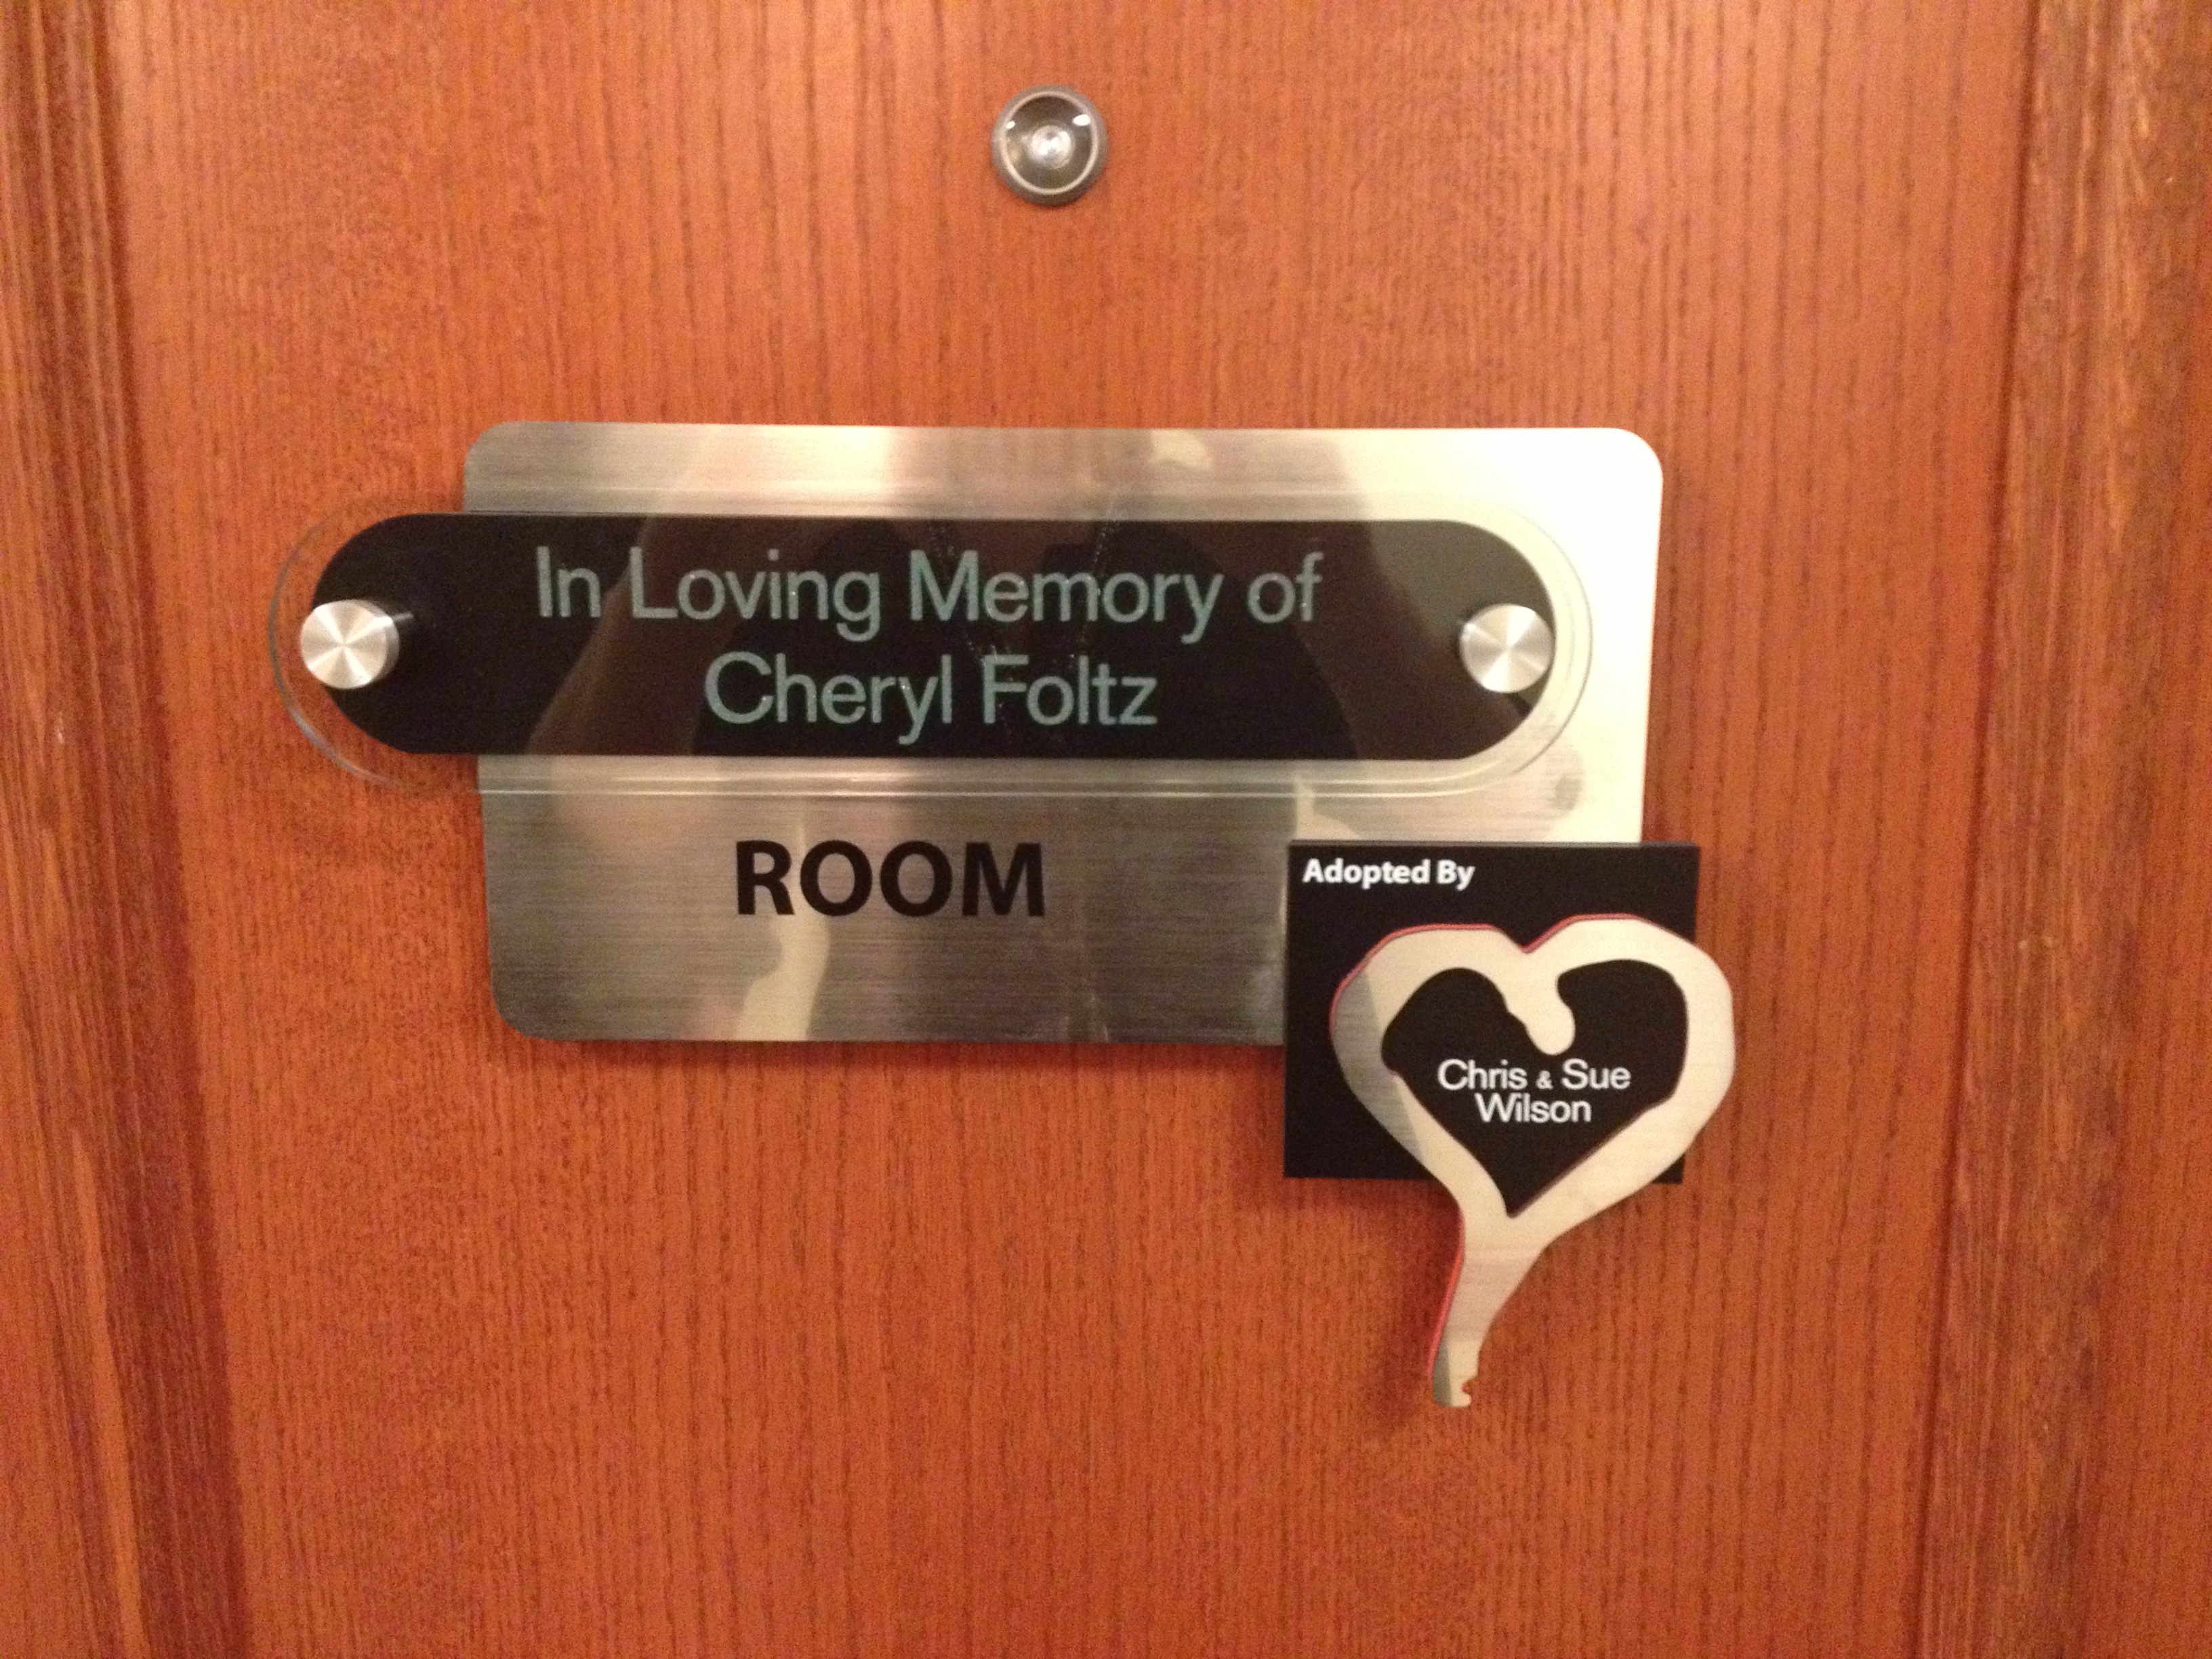 The guest room named in honor of Cheryl